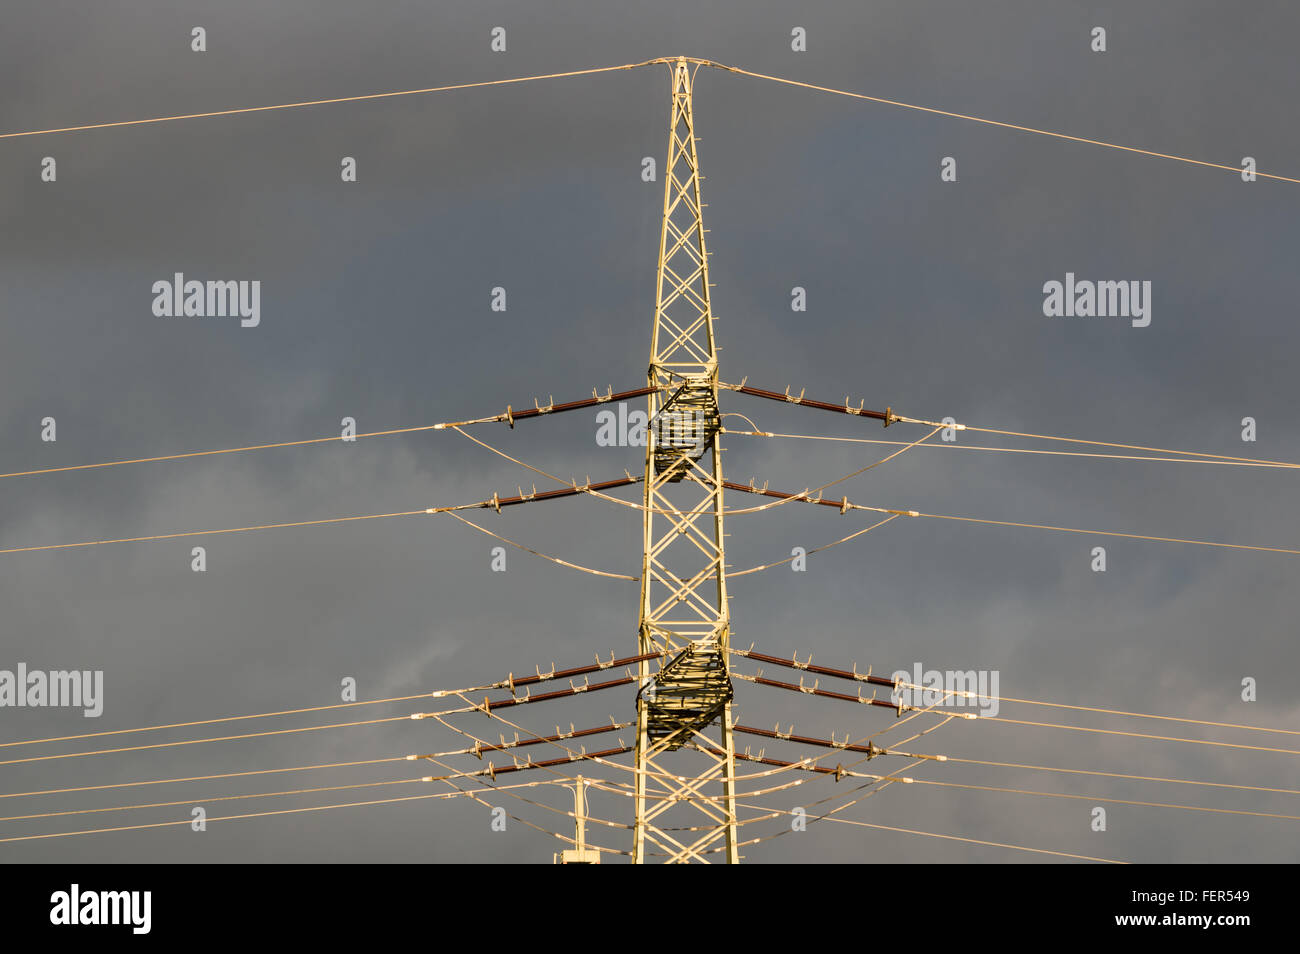 high-voltage electricity pylons against blue sky with rain clouds Stock Photo